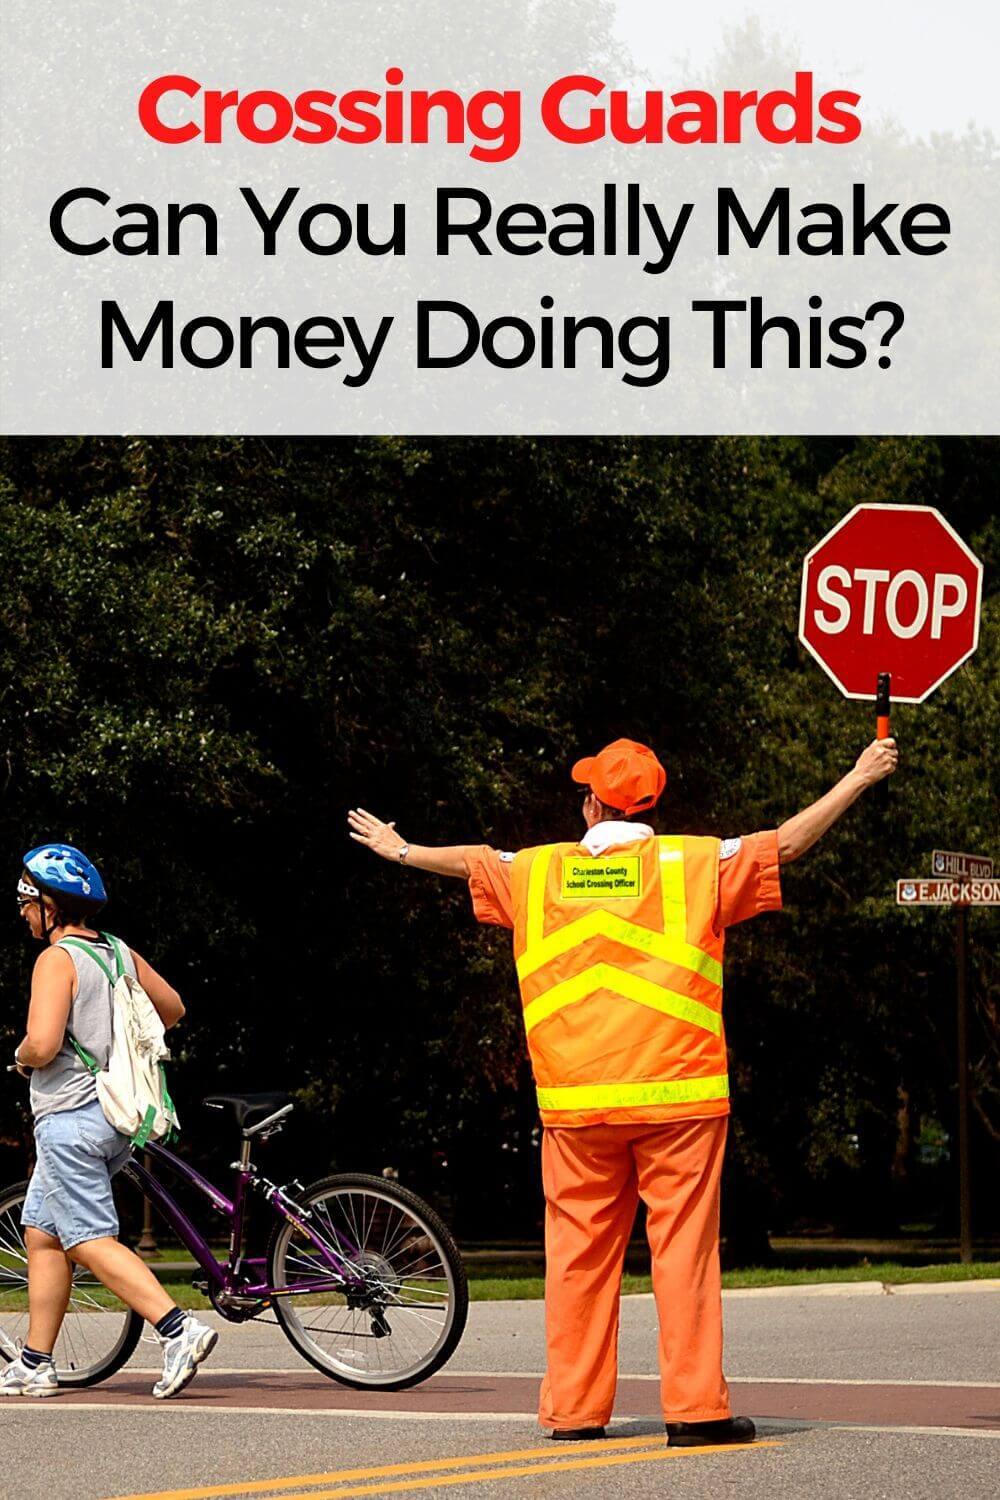 Crossing Guards - Can You Really Make Money Doing This?